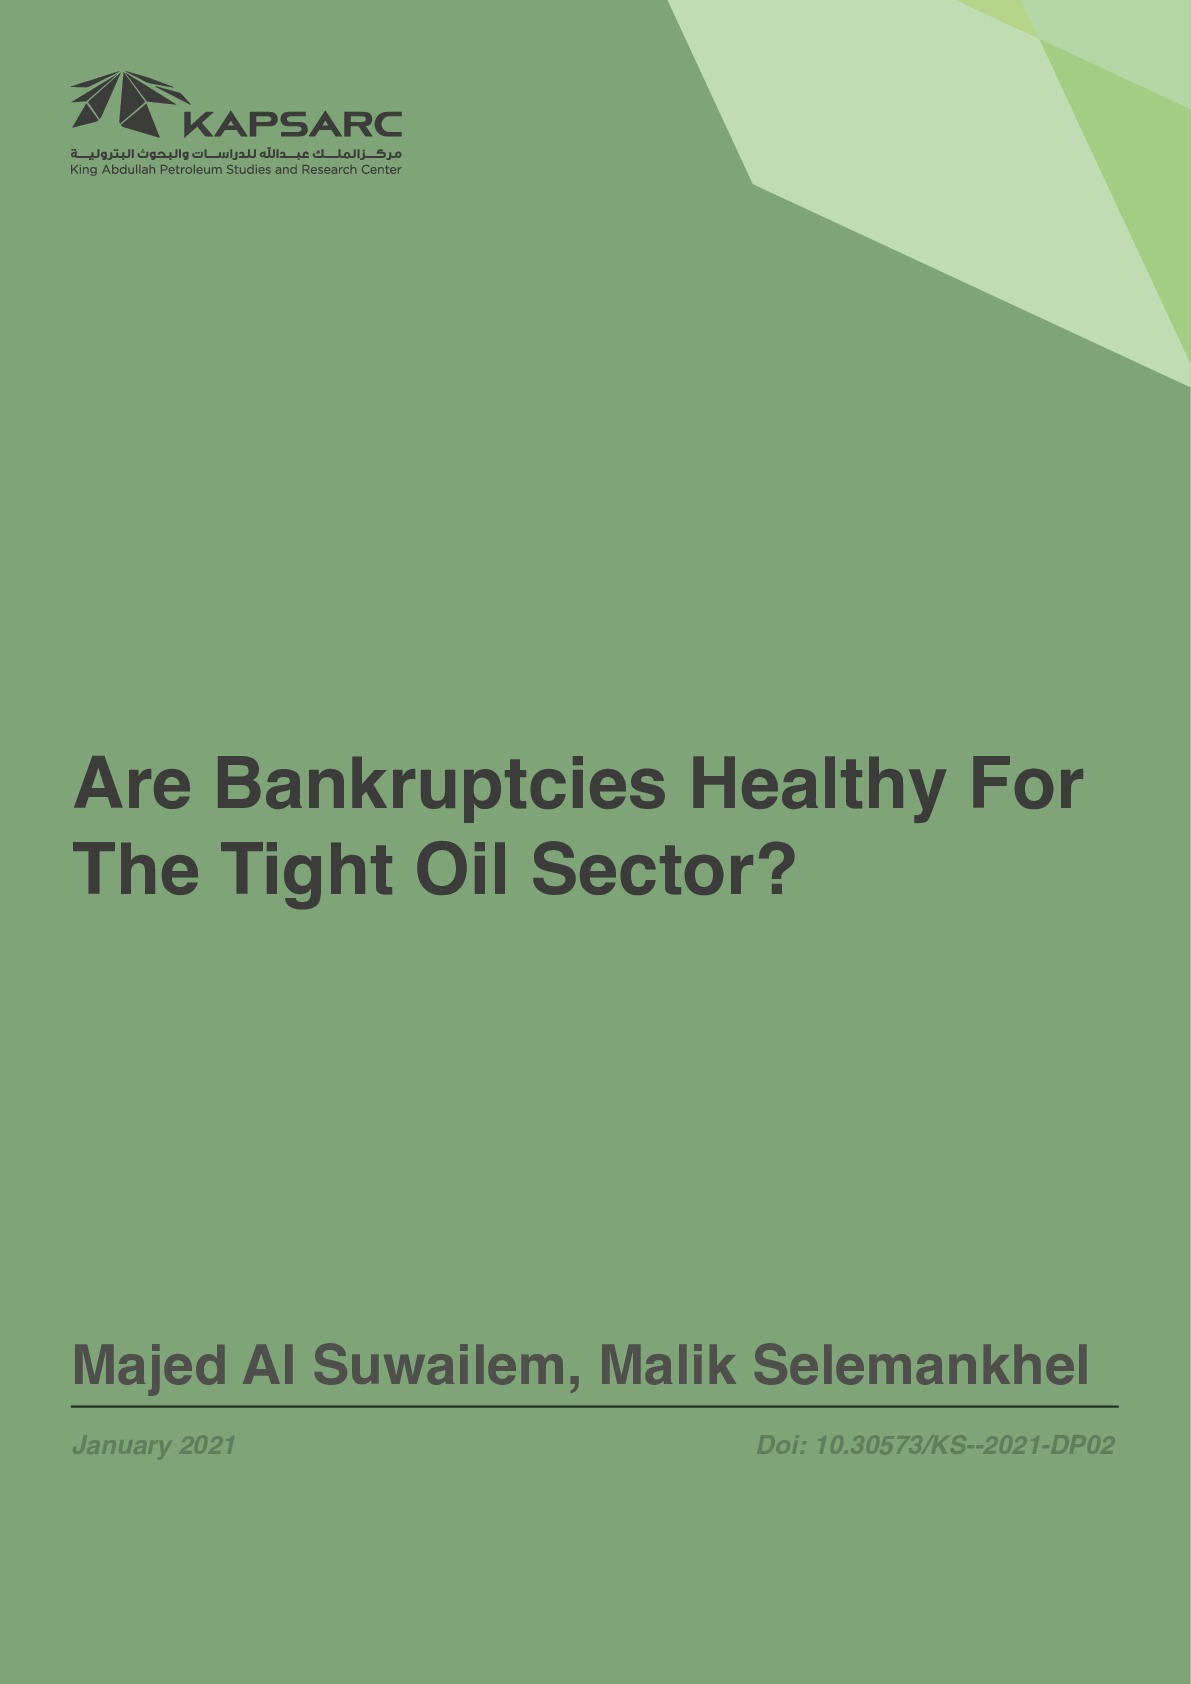 Are Bankruptcies Healthy For The Tight Oil Sector?